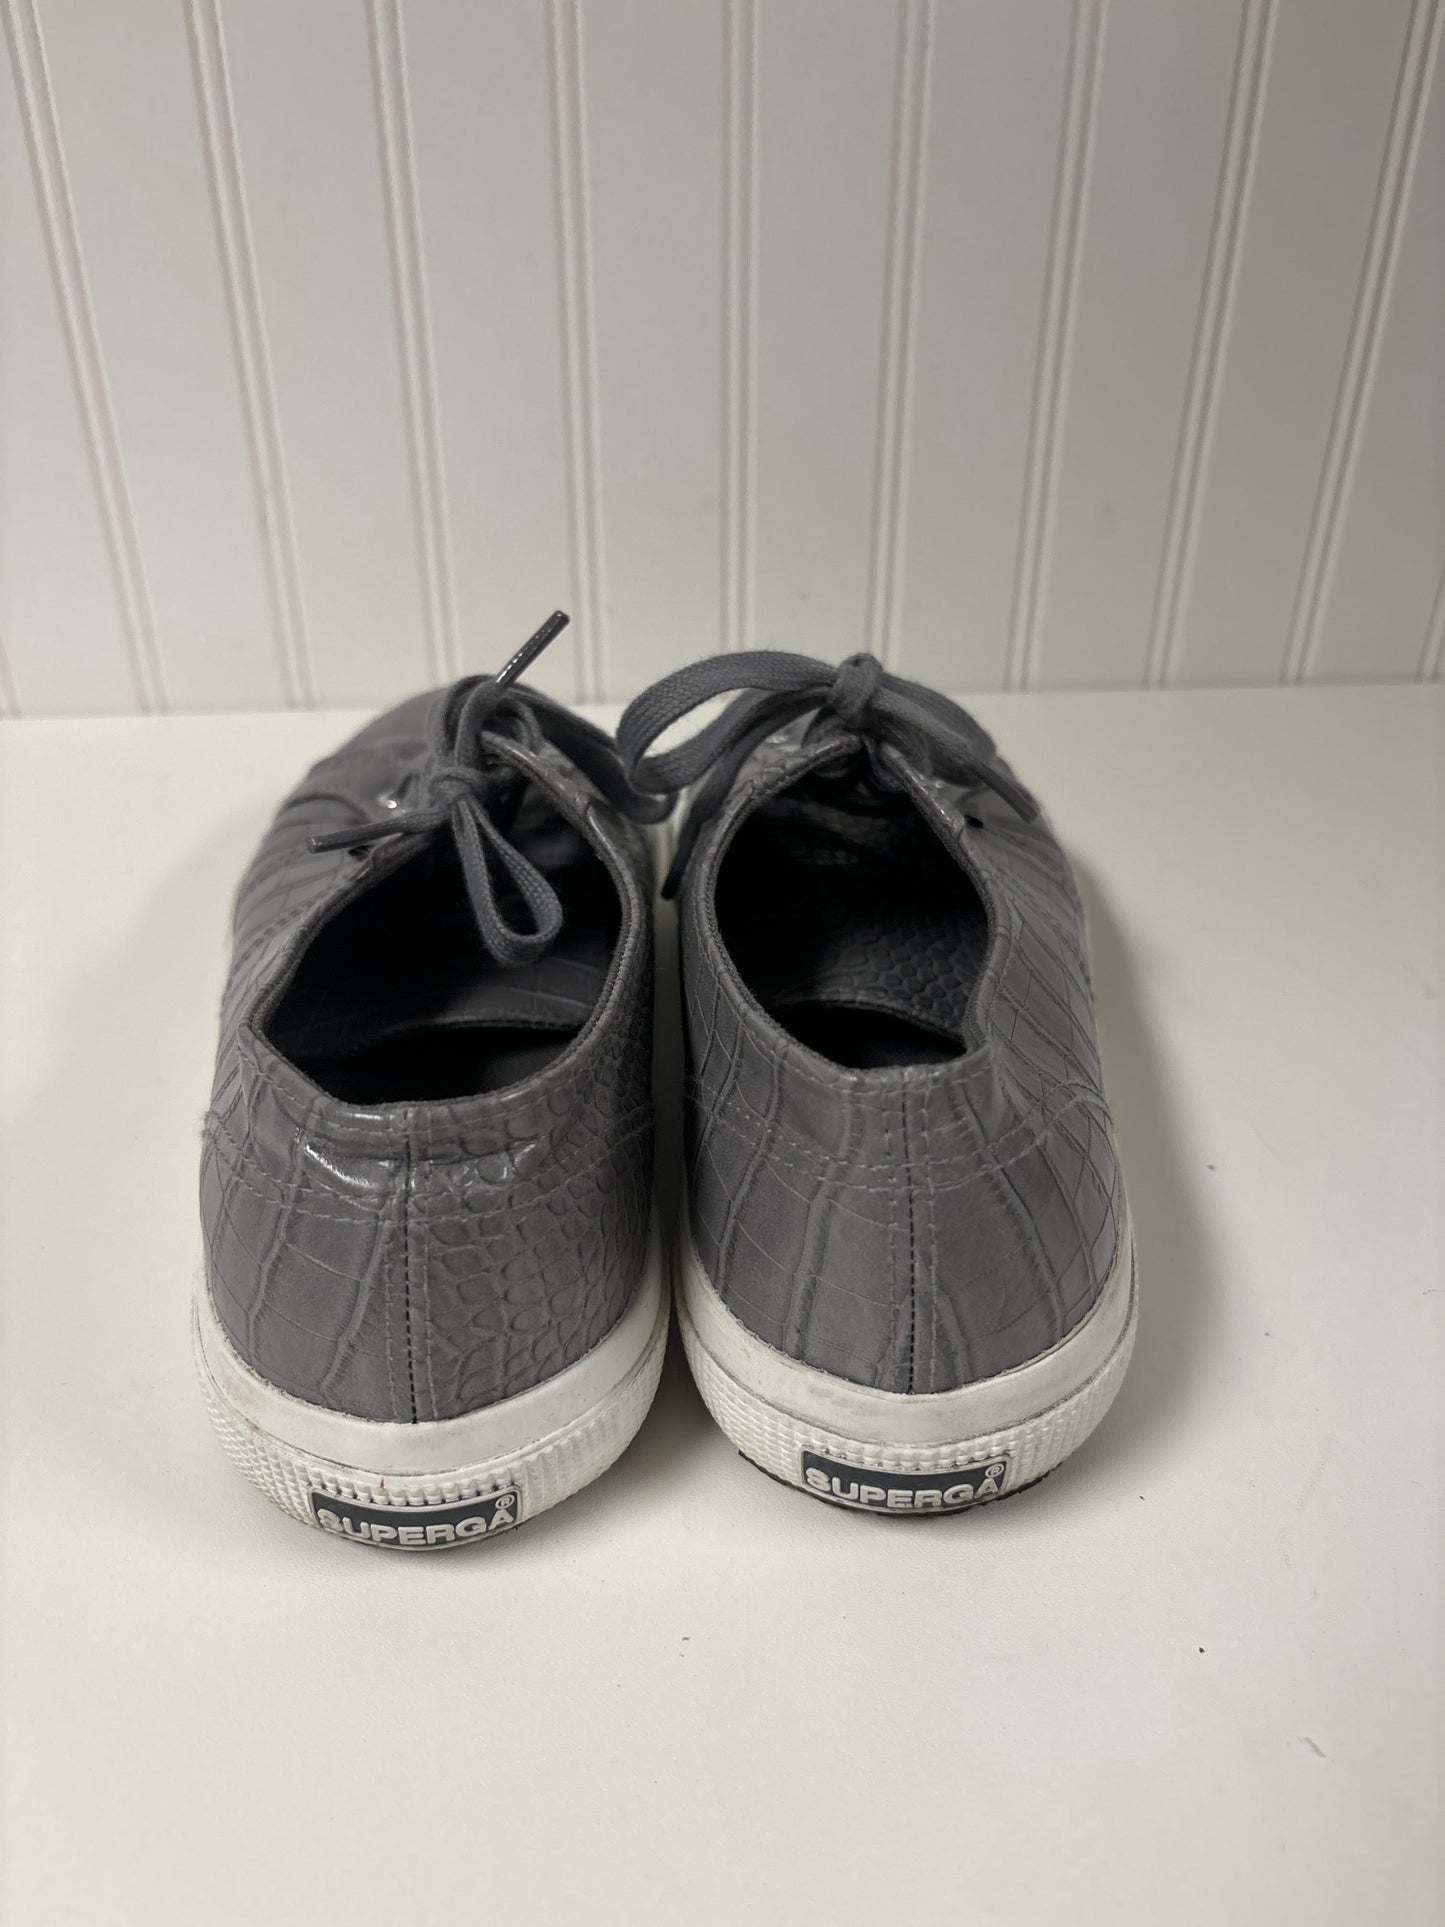 Grey Shoes Sneakers Superga, Size 9